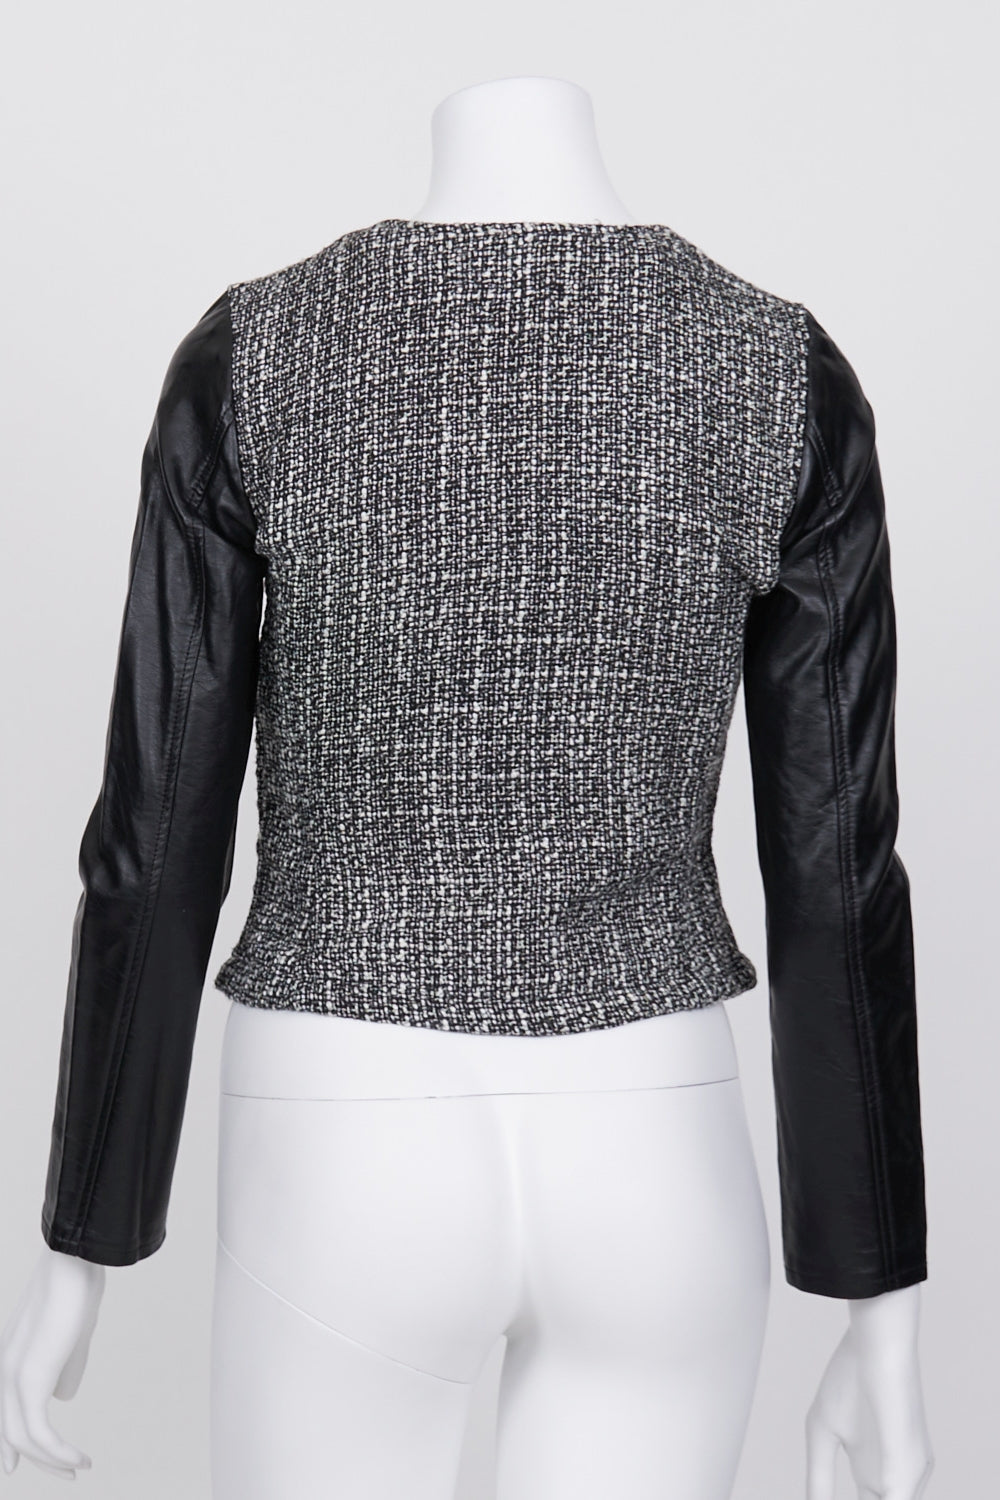 H&amp;M Black And White Patterned Jacket 4